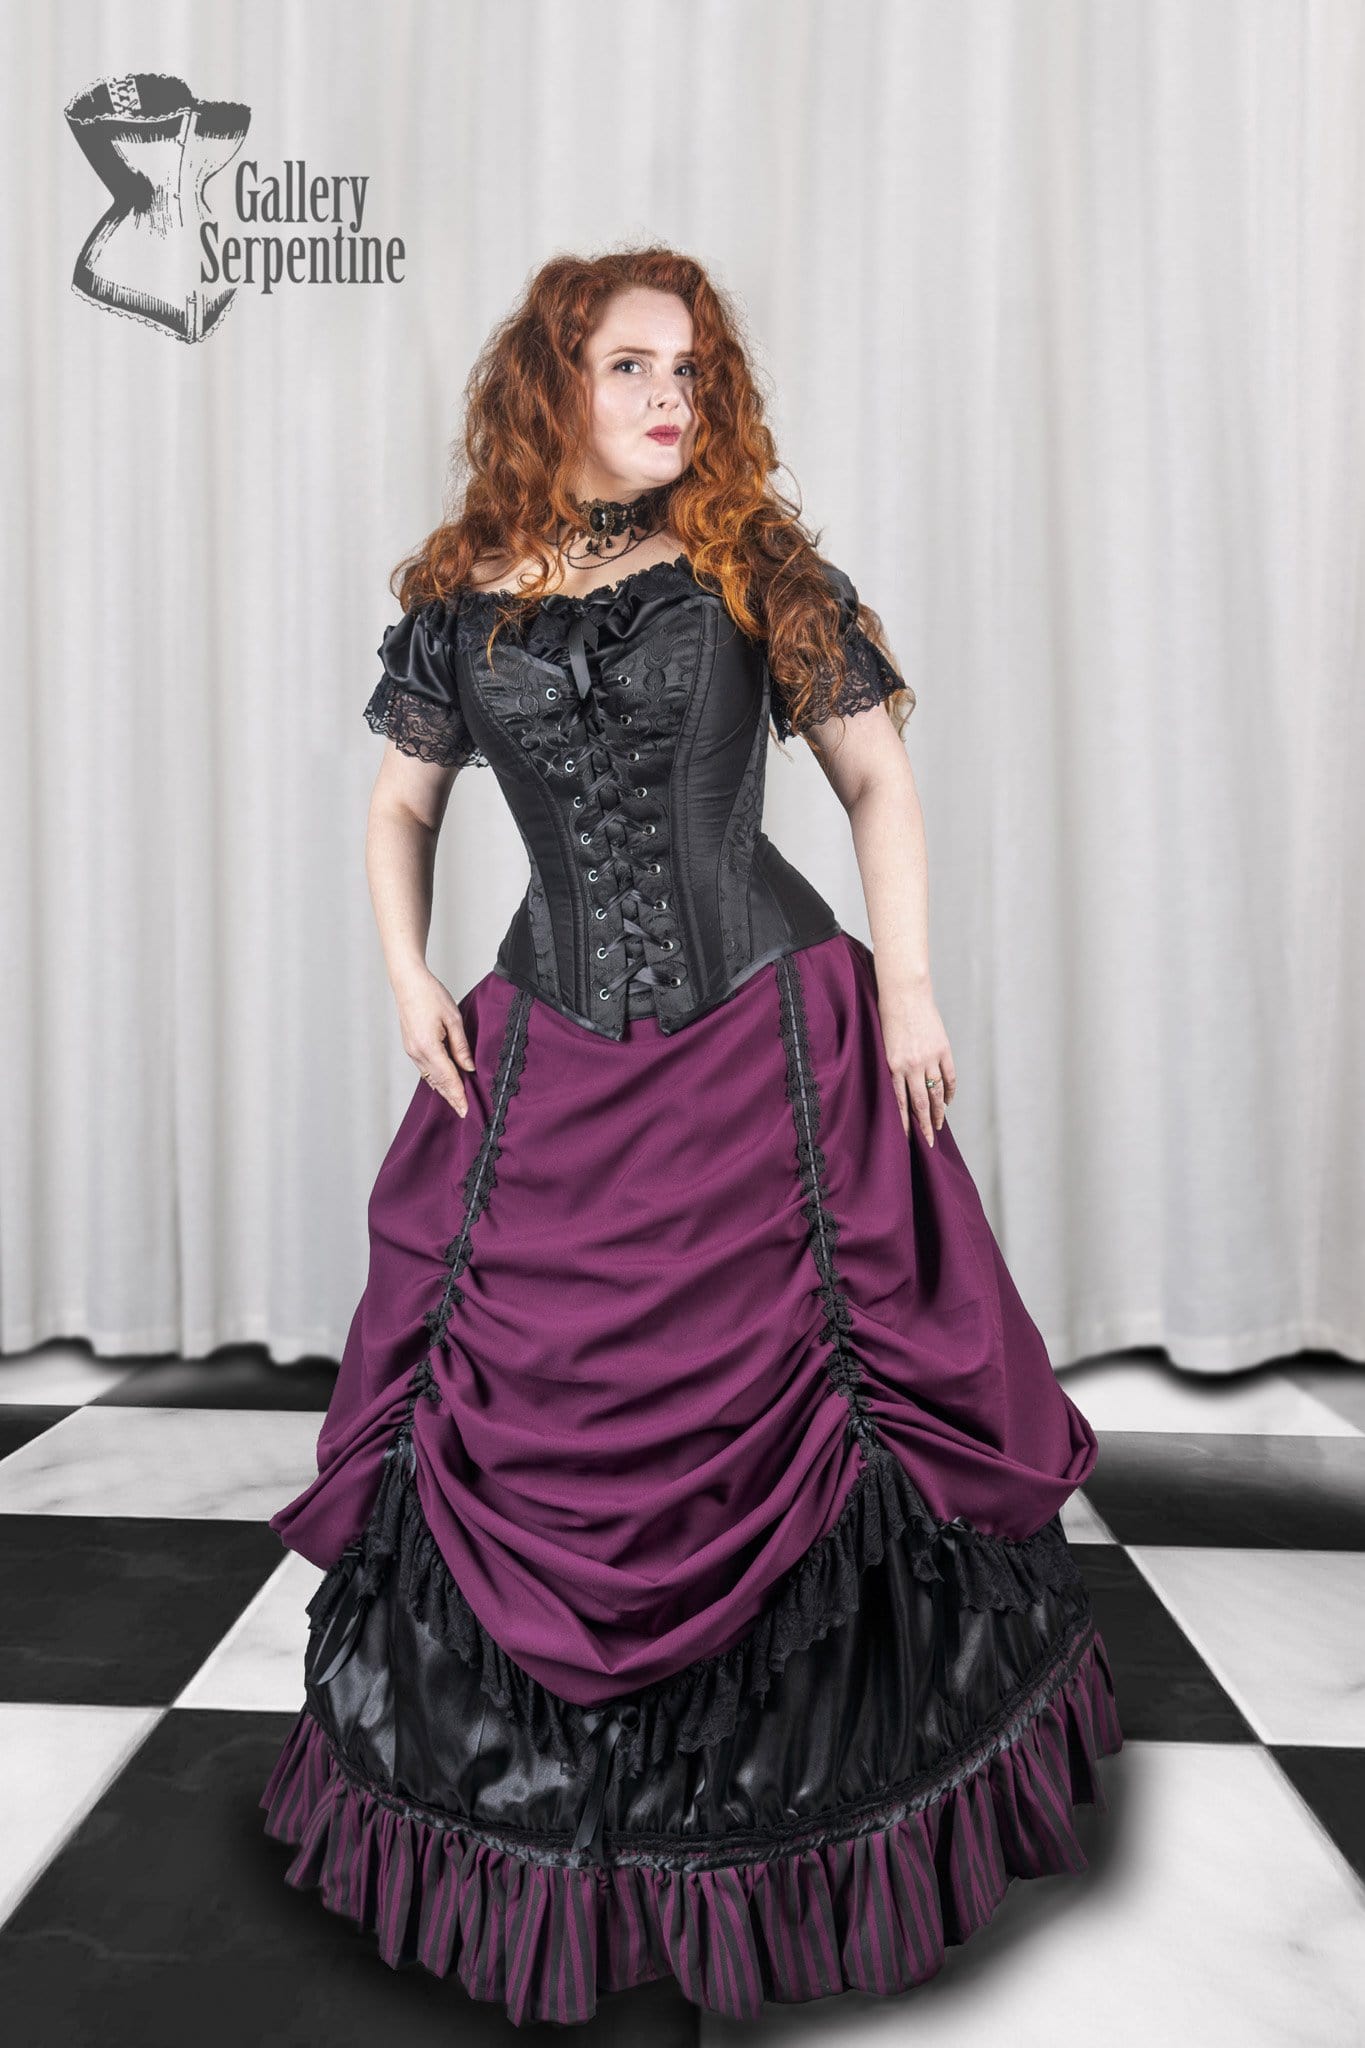 front view of a red headed model wearing a black steel boned over bust corset and burgundy victorian skirt with a hoop underneath it